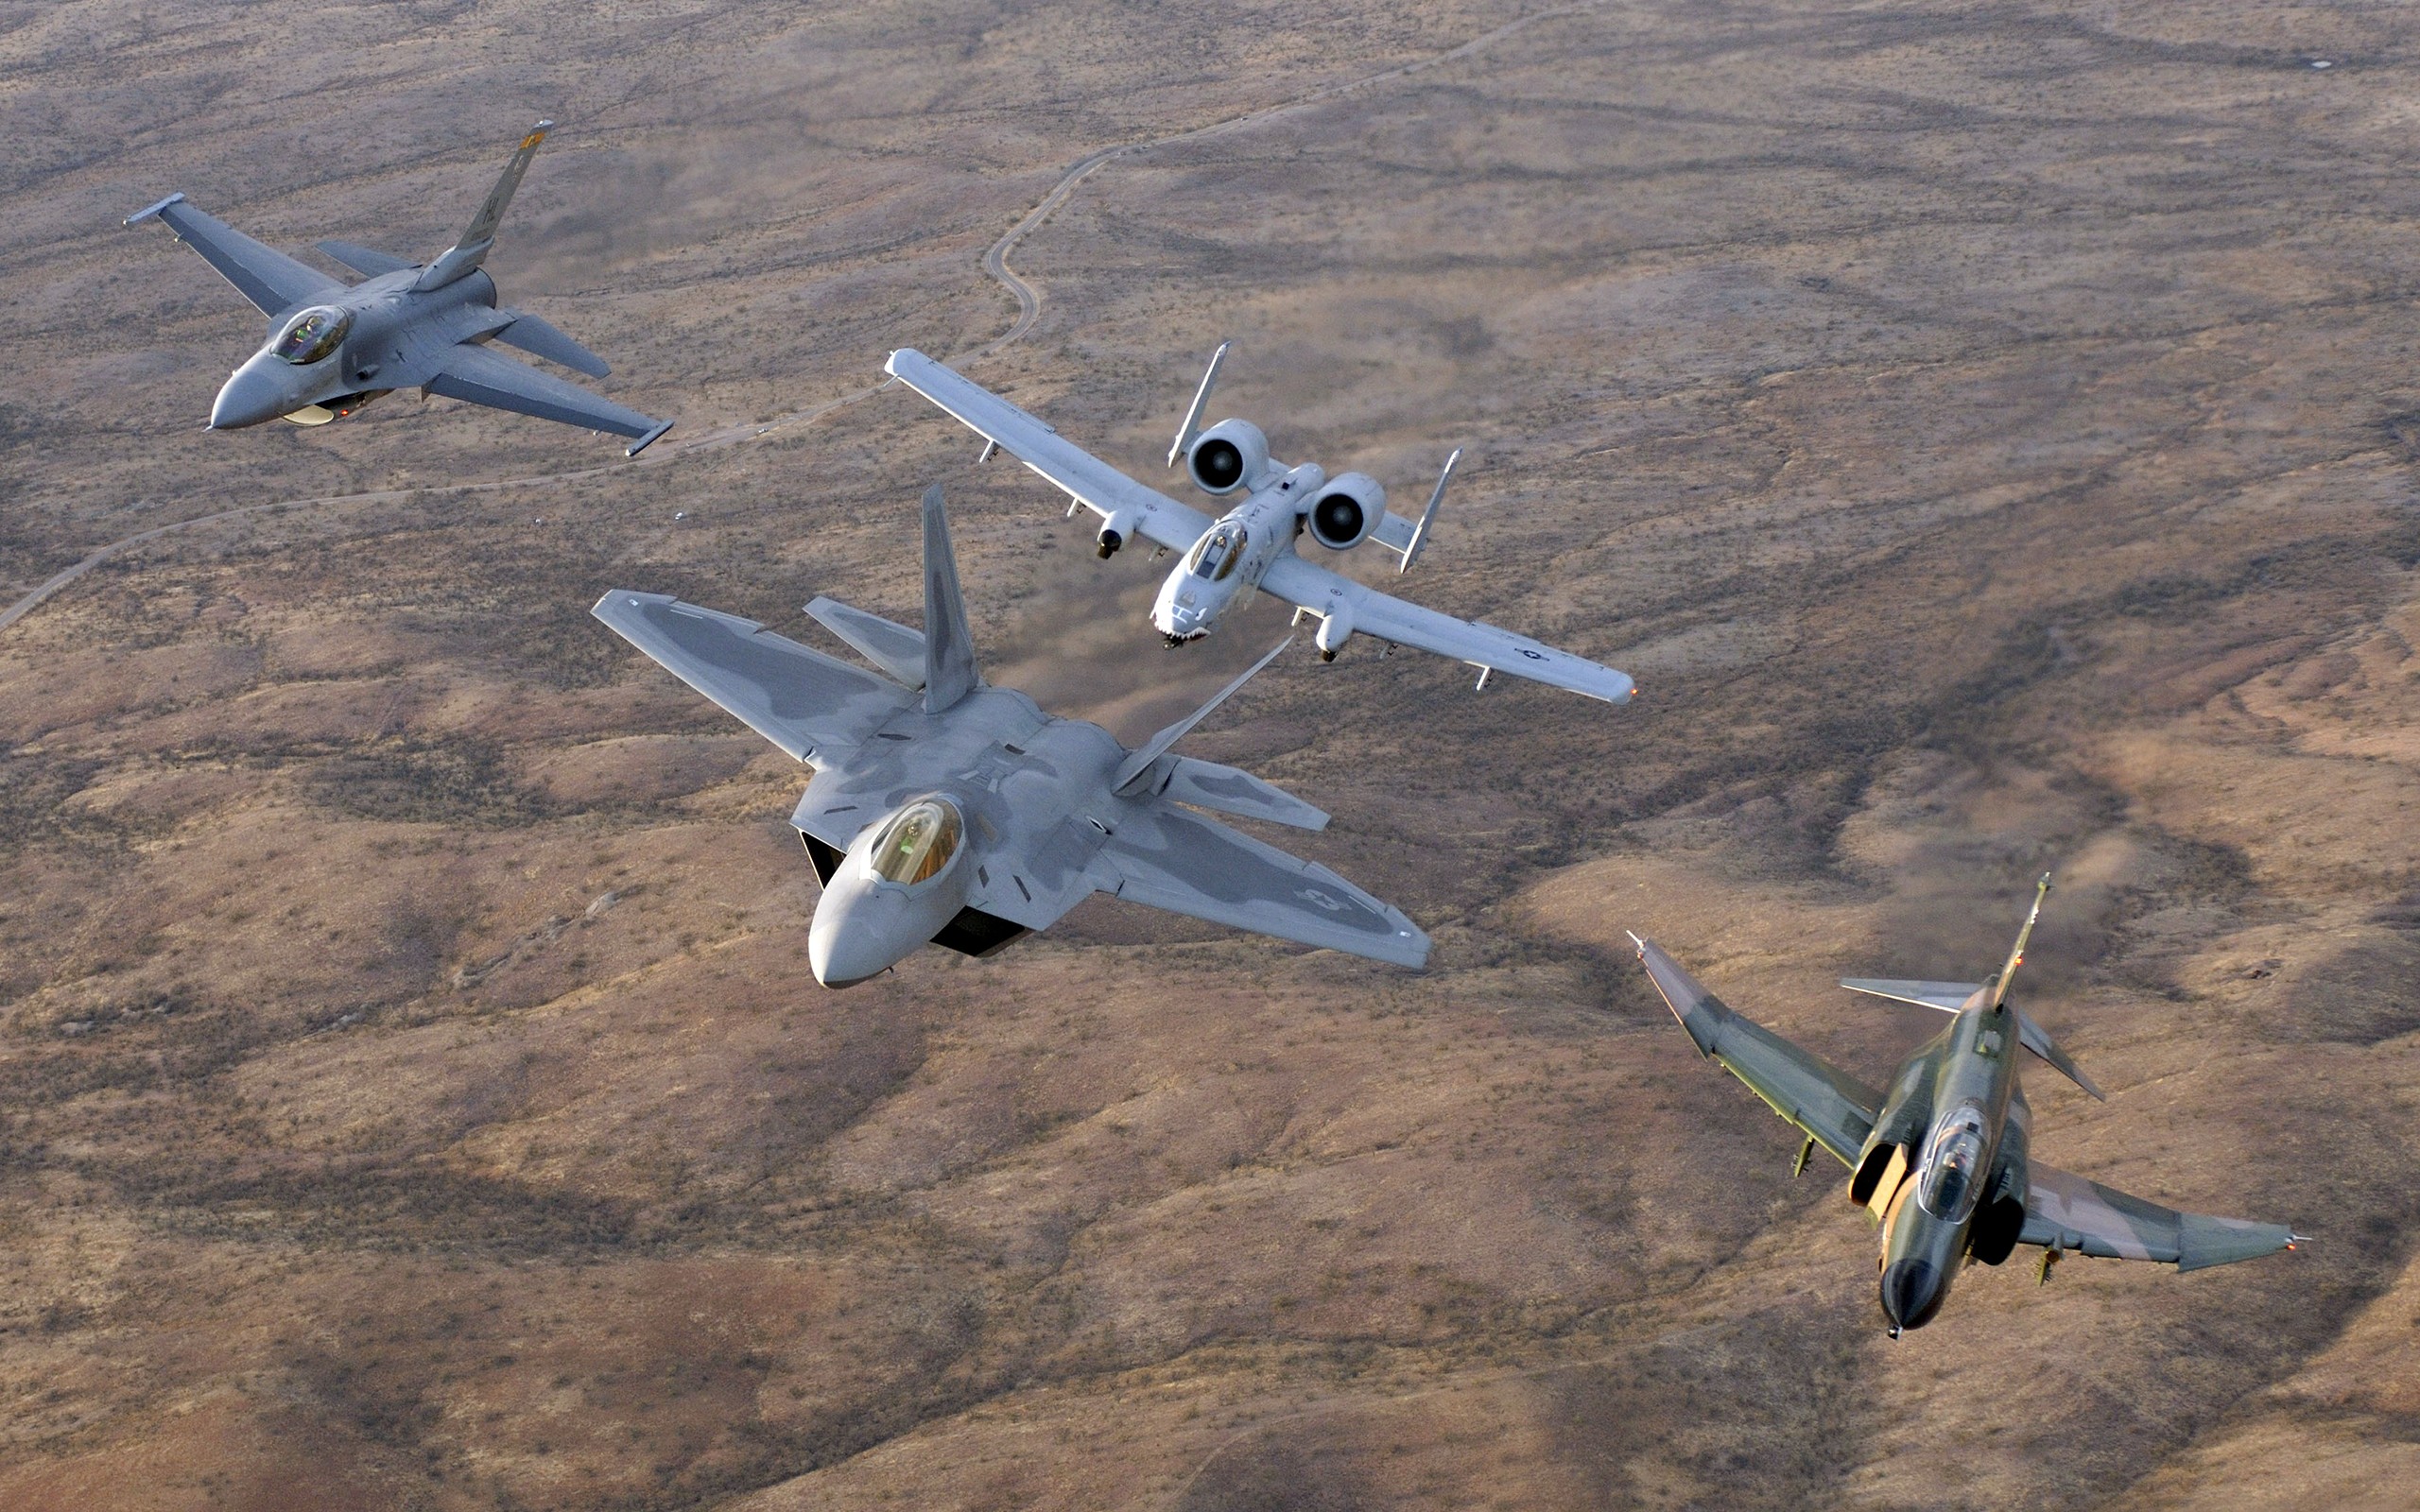 General 2560x1600 General Dynamics F-16 Fighting Falcon McDonnell Douglas F-4 Phantom II F-22 Raptor military aircraft aircraft jet fighter US Air Force Fairchild Republic A-10 Thunderbolt II vehicle military vehicle military